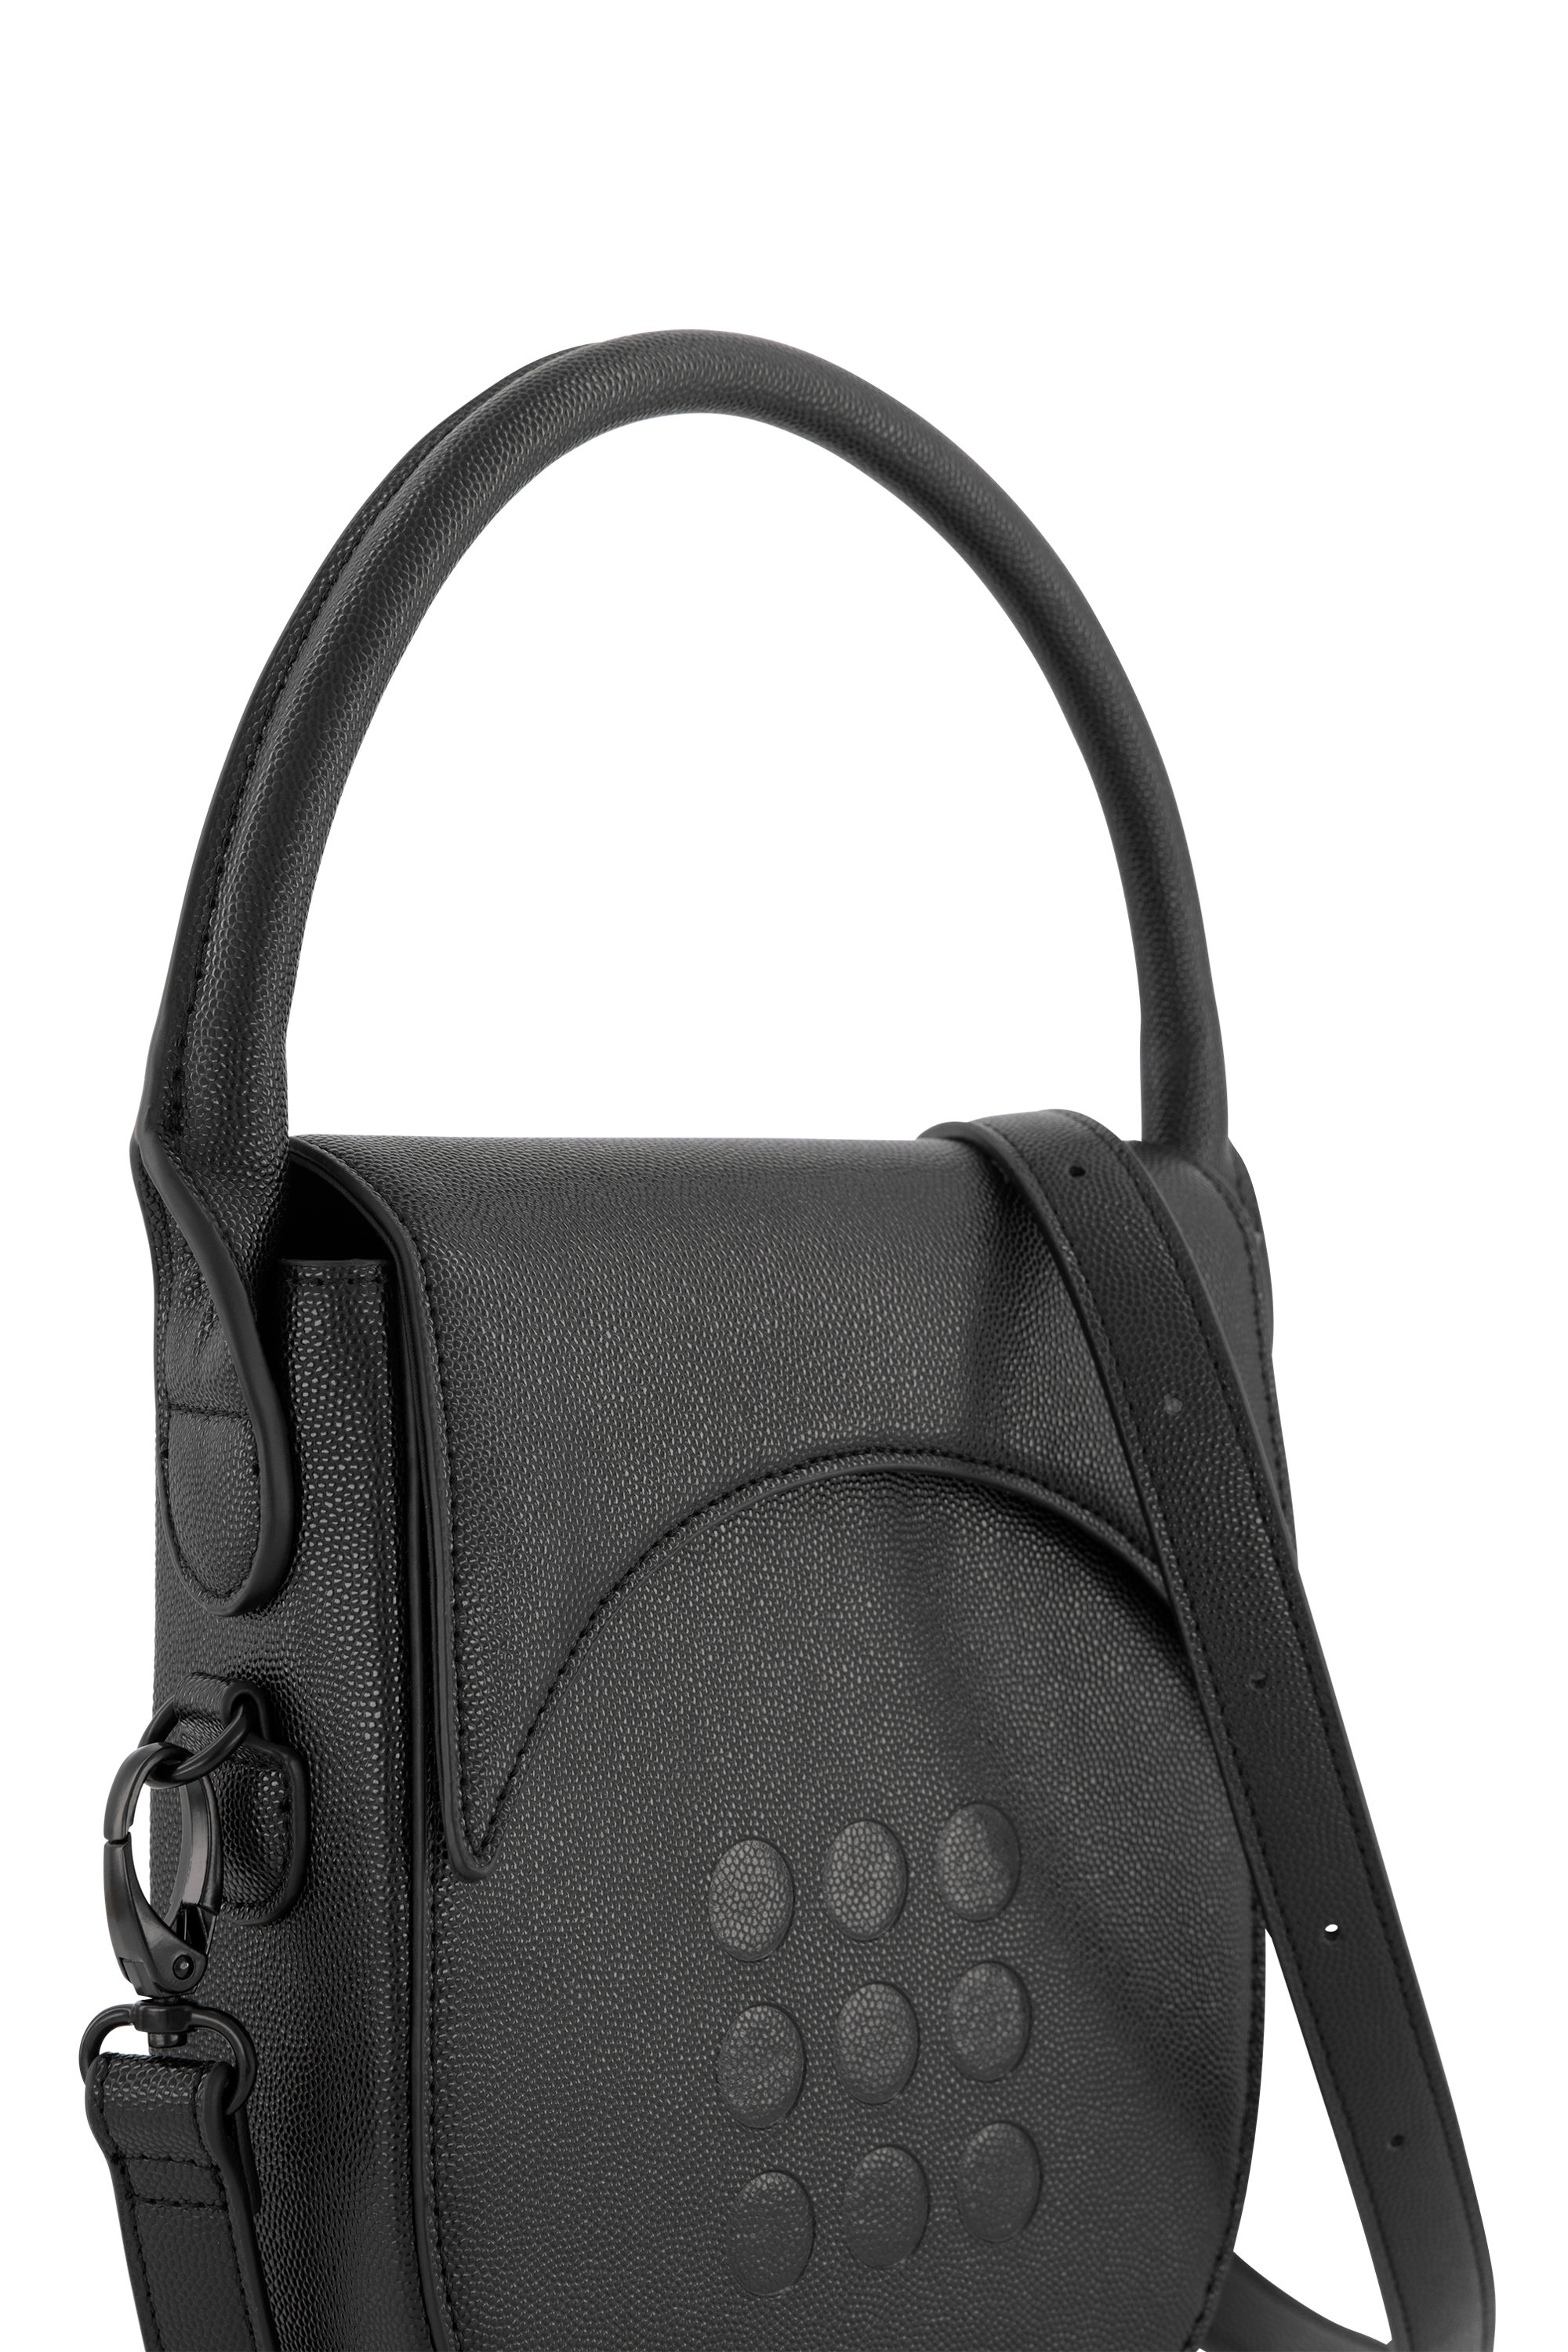 products-bag_black_detail-png